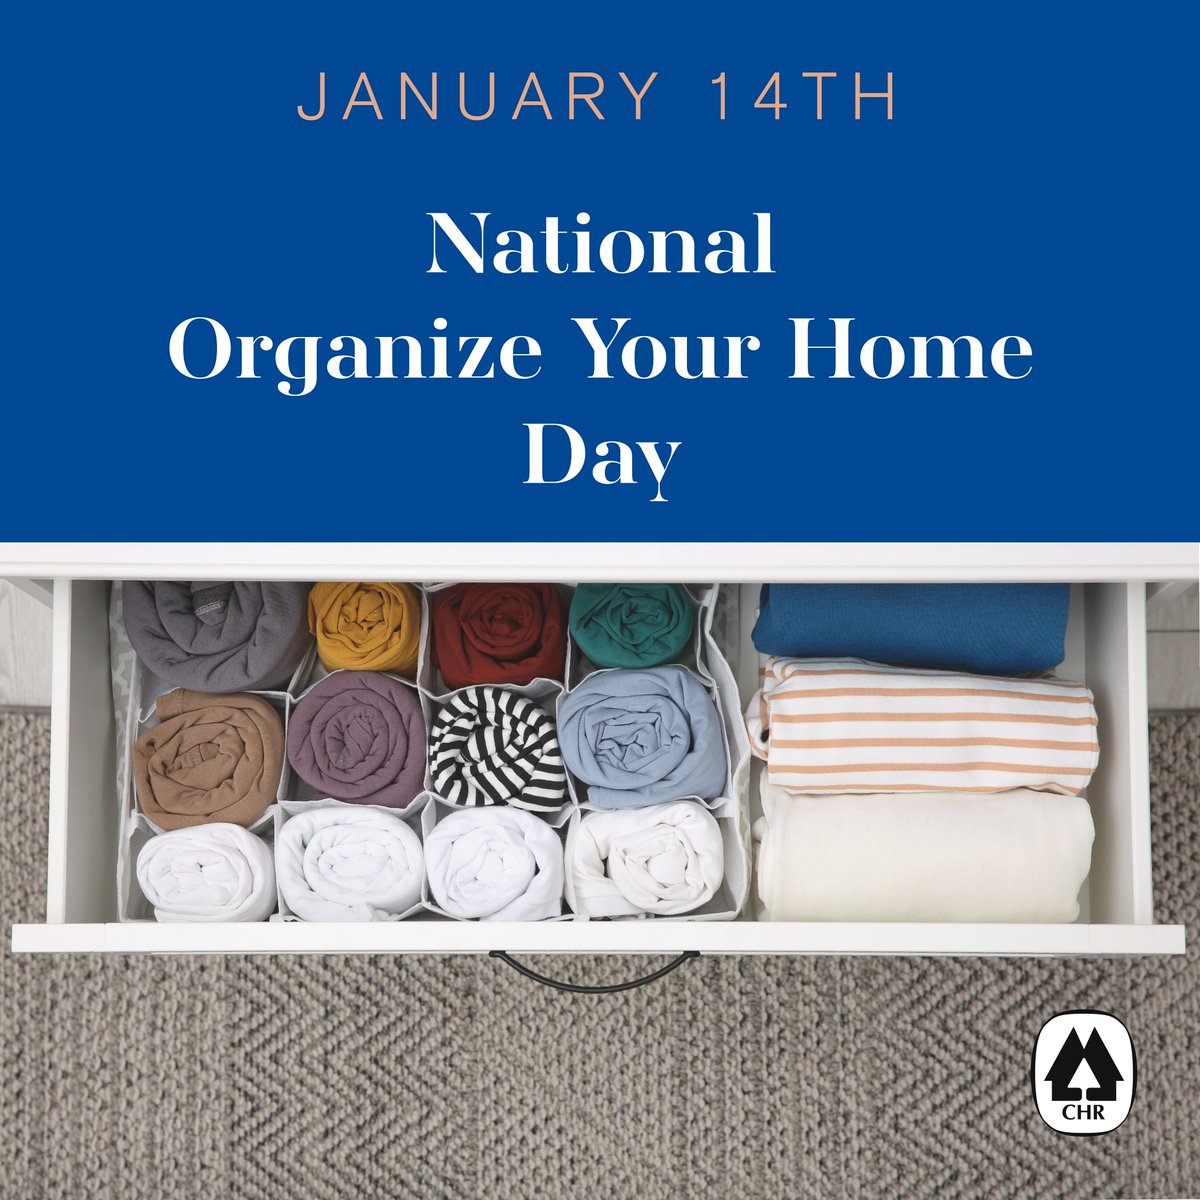 Sunday is National Organize Your Home Day. Share your best space organizing tip...
#organizeyourhome Organize Your Home #LiveAtCHRapartments #getorganized